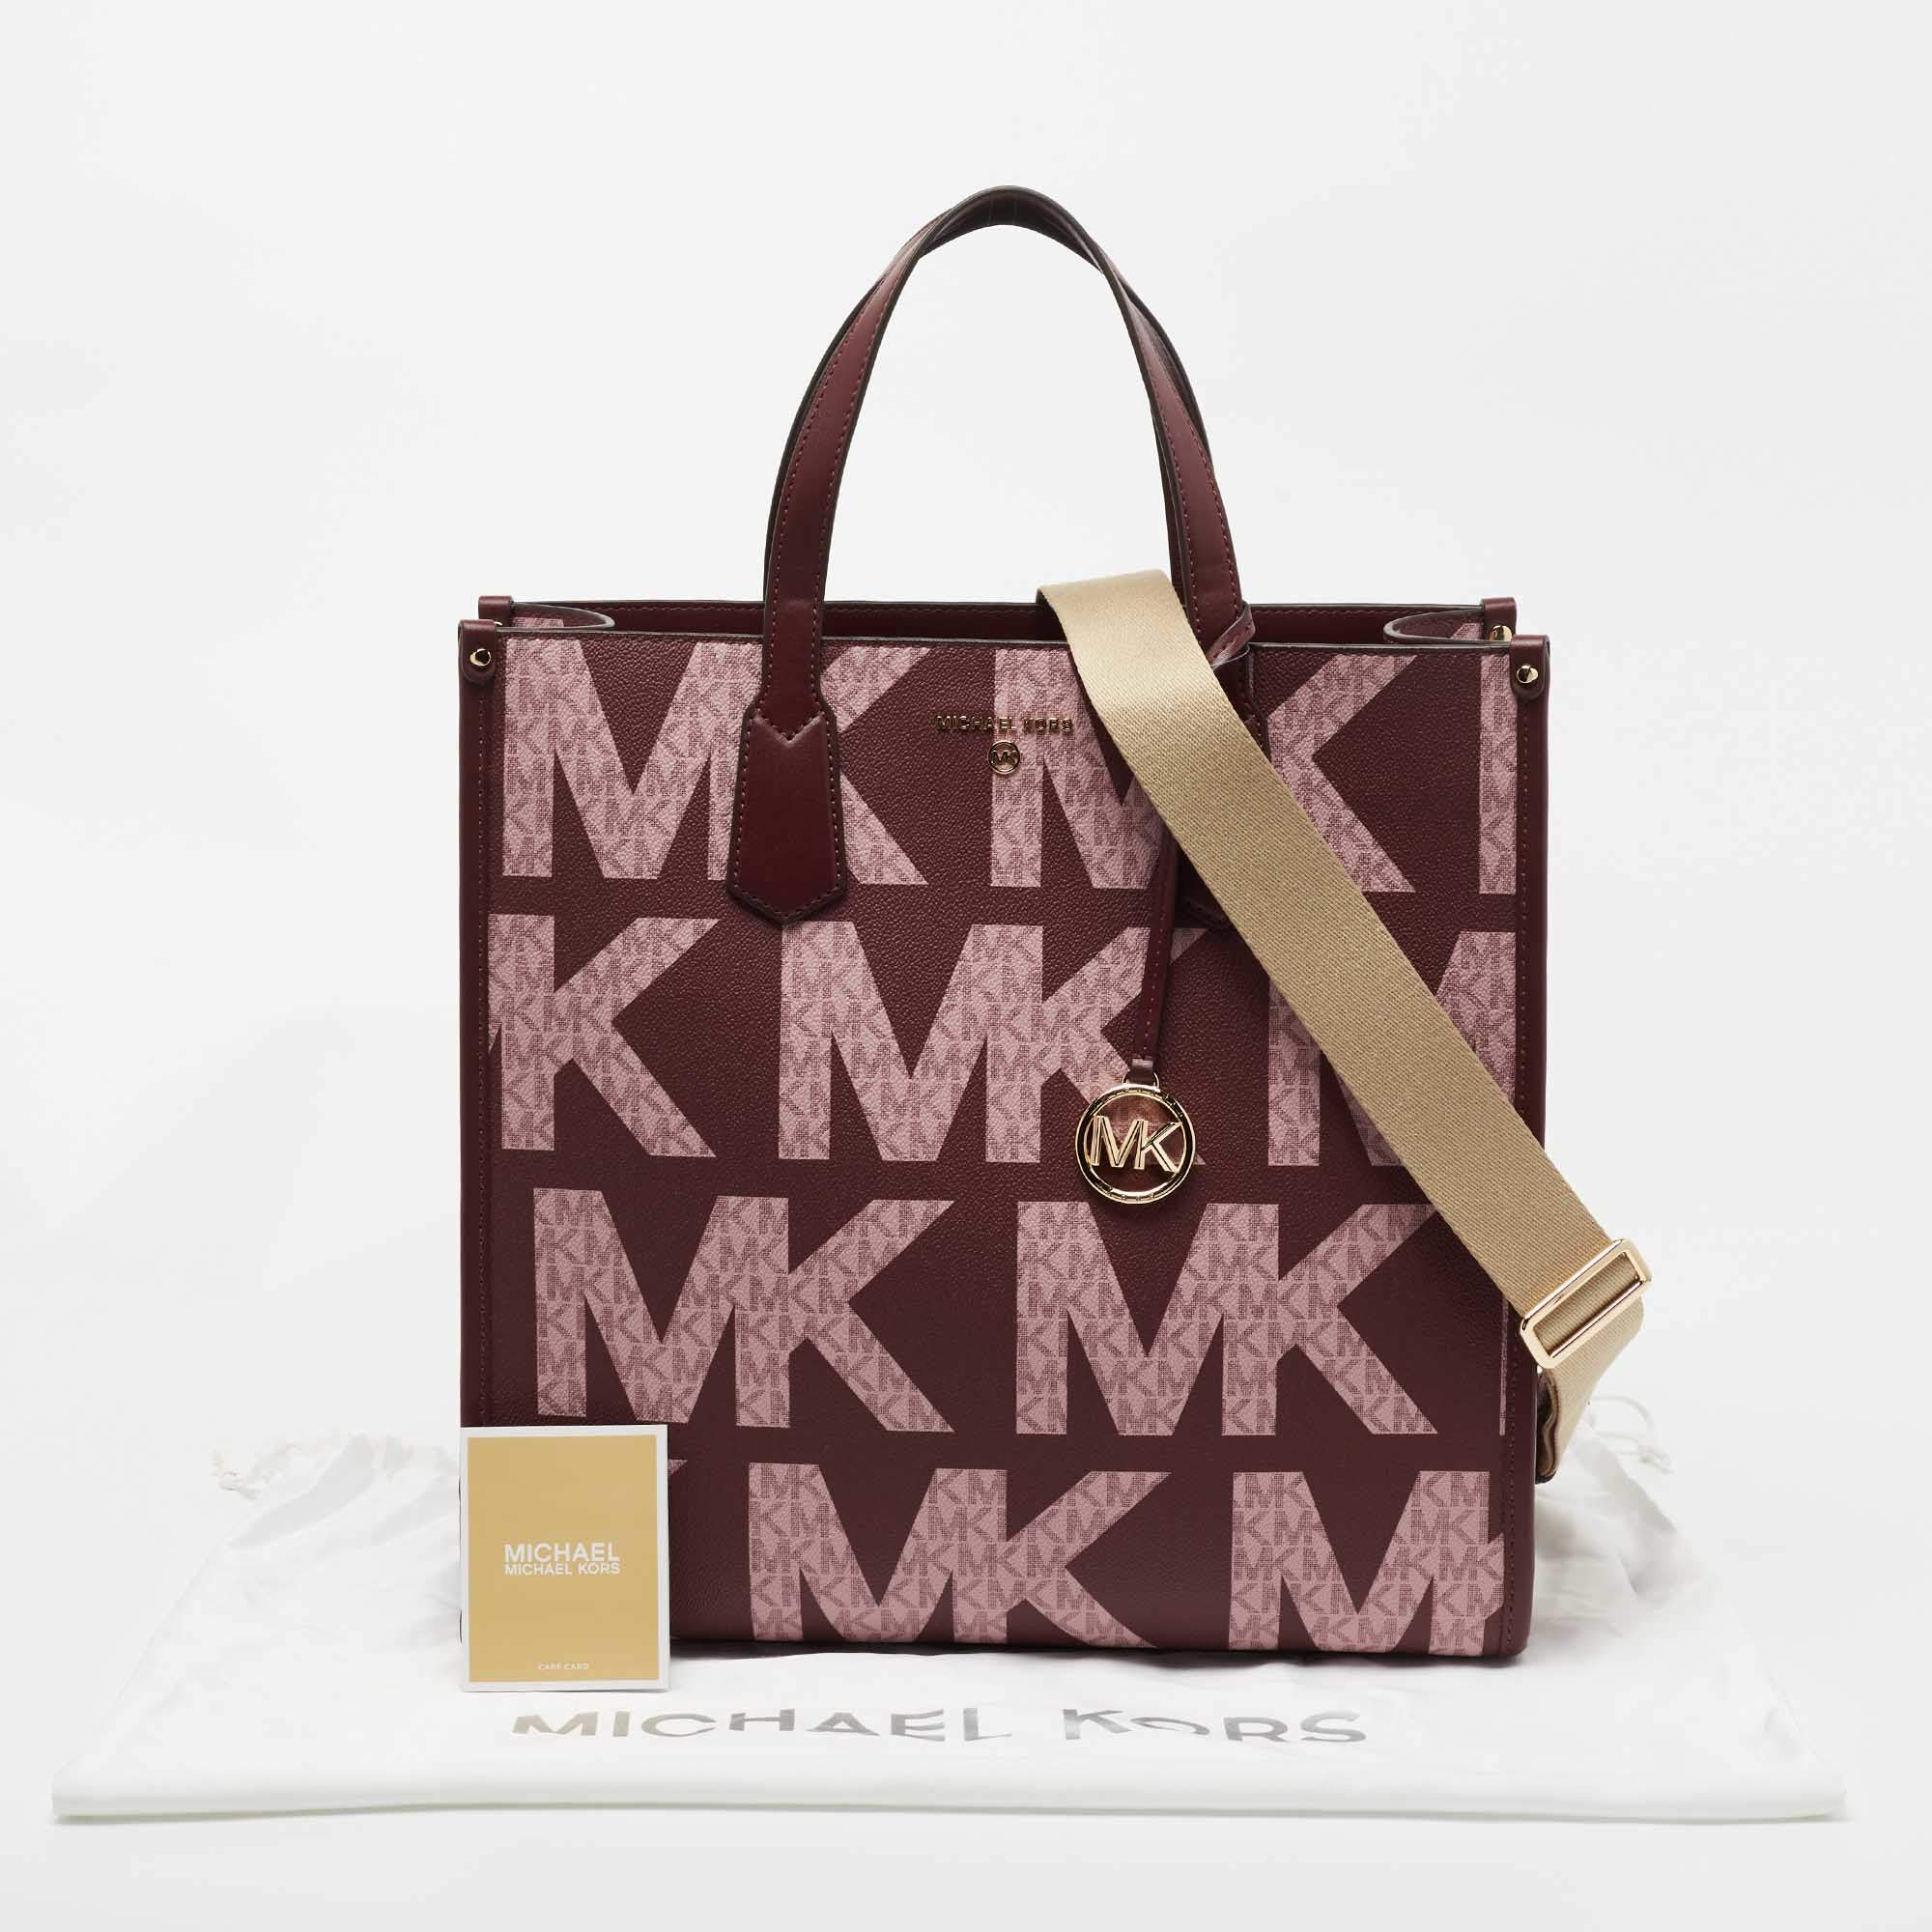 MICHAEL KORS - Maple Large Satchel- New w/ Tags in 2023